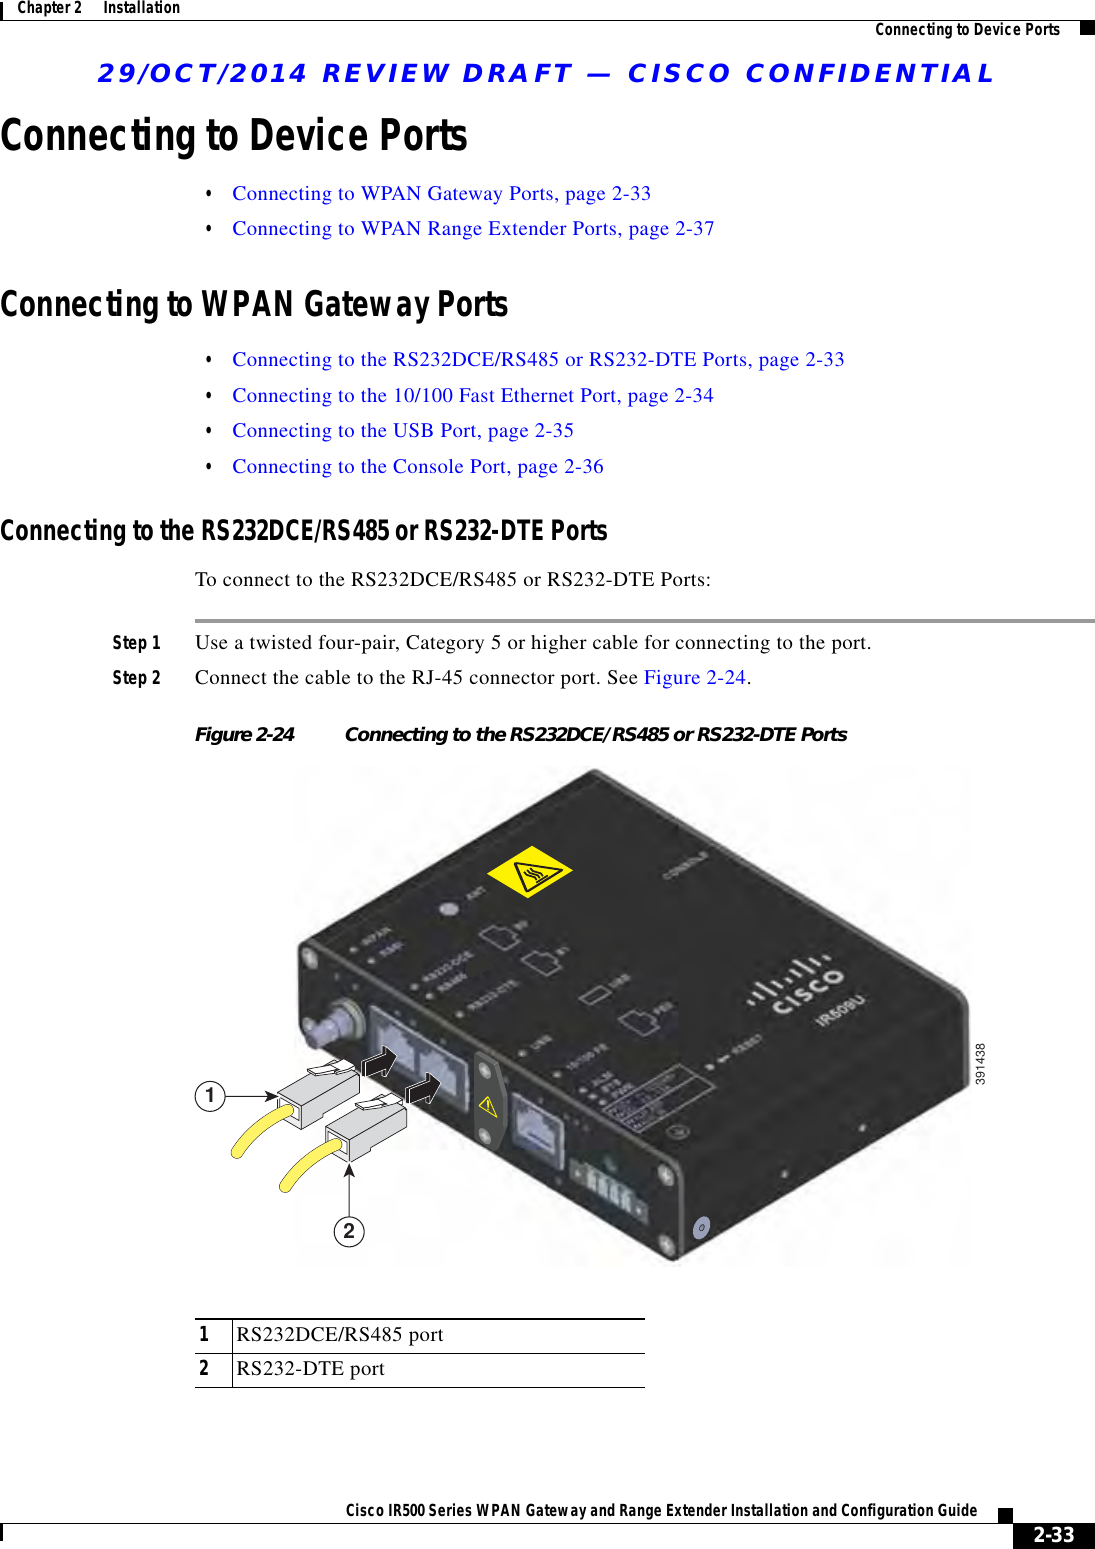 29/OCT/2014 REVIEW DRAFT — CISCO CONFIDENTIAL2-33Cisco IR500 Series WPAN Gateway and Range Extender Installation and Configuration Guide Chapter 2      Installation Connecting to Device PortsConnecting to Device Ports  • Connecting to WPAN Gateway Ports, page 2-33  • Connecting to WPAN Range Extender Ports, page 2-37Connecting to WPAN Gateway Ports  • Connecting to the RS232DCE/RS485 or RS232-DTE Ports, page 2-33  • Connecting to the 10/100 Fast Ethernet Port, page 2-34  • Connecting to the USB Port, page 2-35  • Connecting to the Console Port, page 2-36Connecting to the RS232DCE/RS485 or RS232-DTE PortsTo connect to the RS232DCE/RS485 or RS232-DTE Ports:Step 1 Use a twisted four-pair, Category 5 or higher cable for connecting to the port.Step 2 Connect the cable to the RJ-45 connector port. See Figure 2-24.Figure 2-24 Connecting to the RS232DCE/RS485 or RS232-DTE Ports391438211RS232DCE/RS485 port2RS232-DTE port